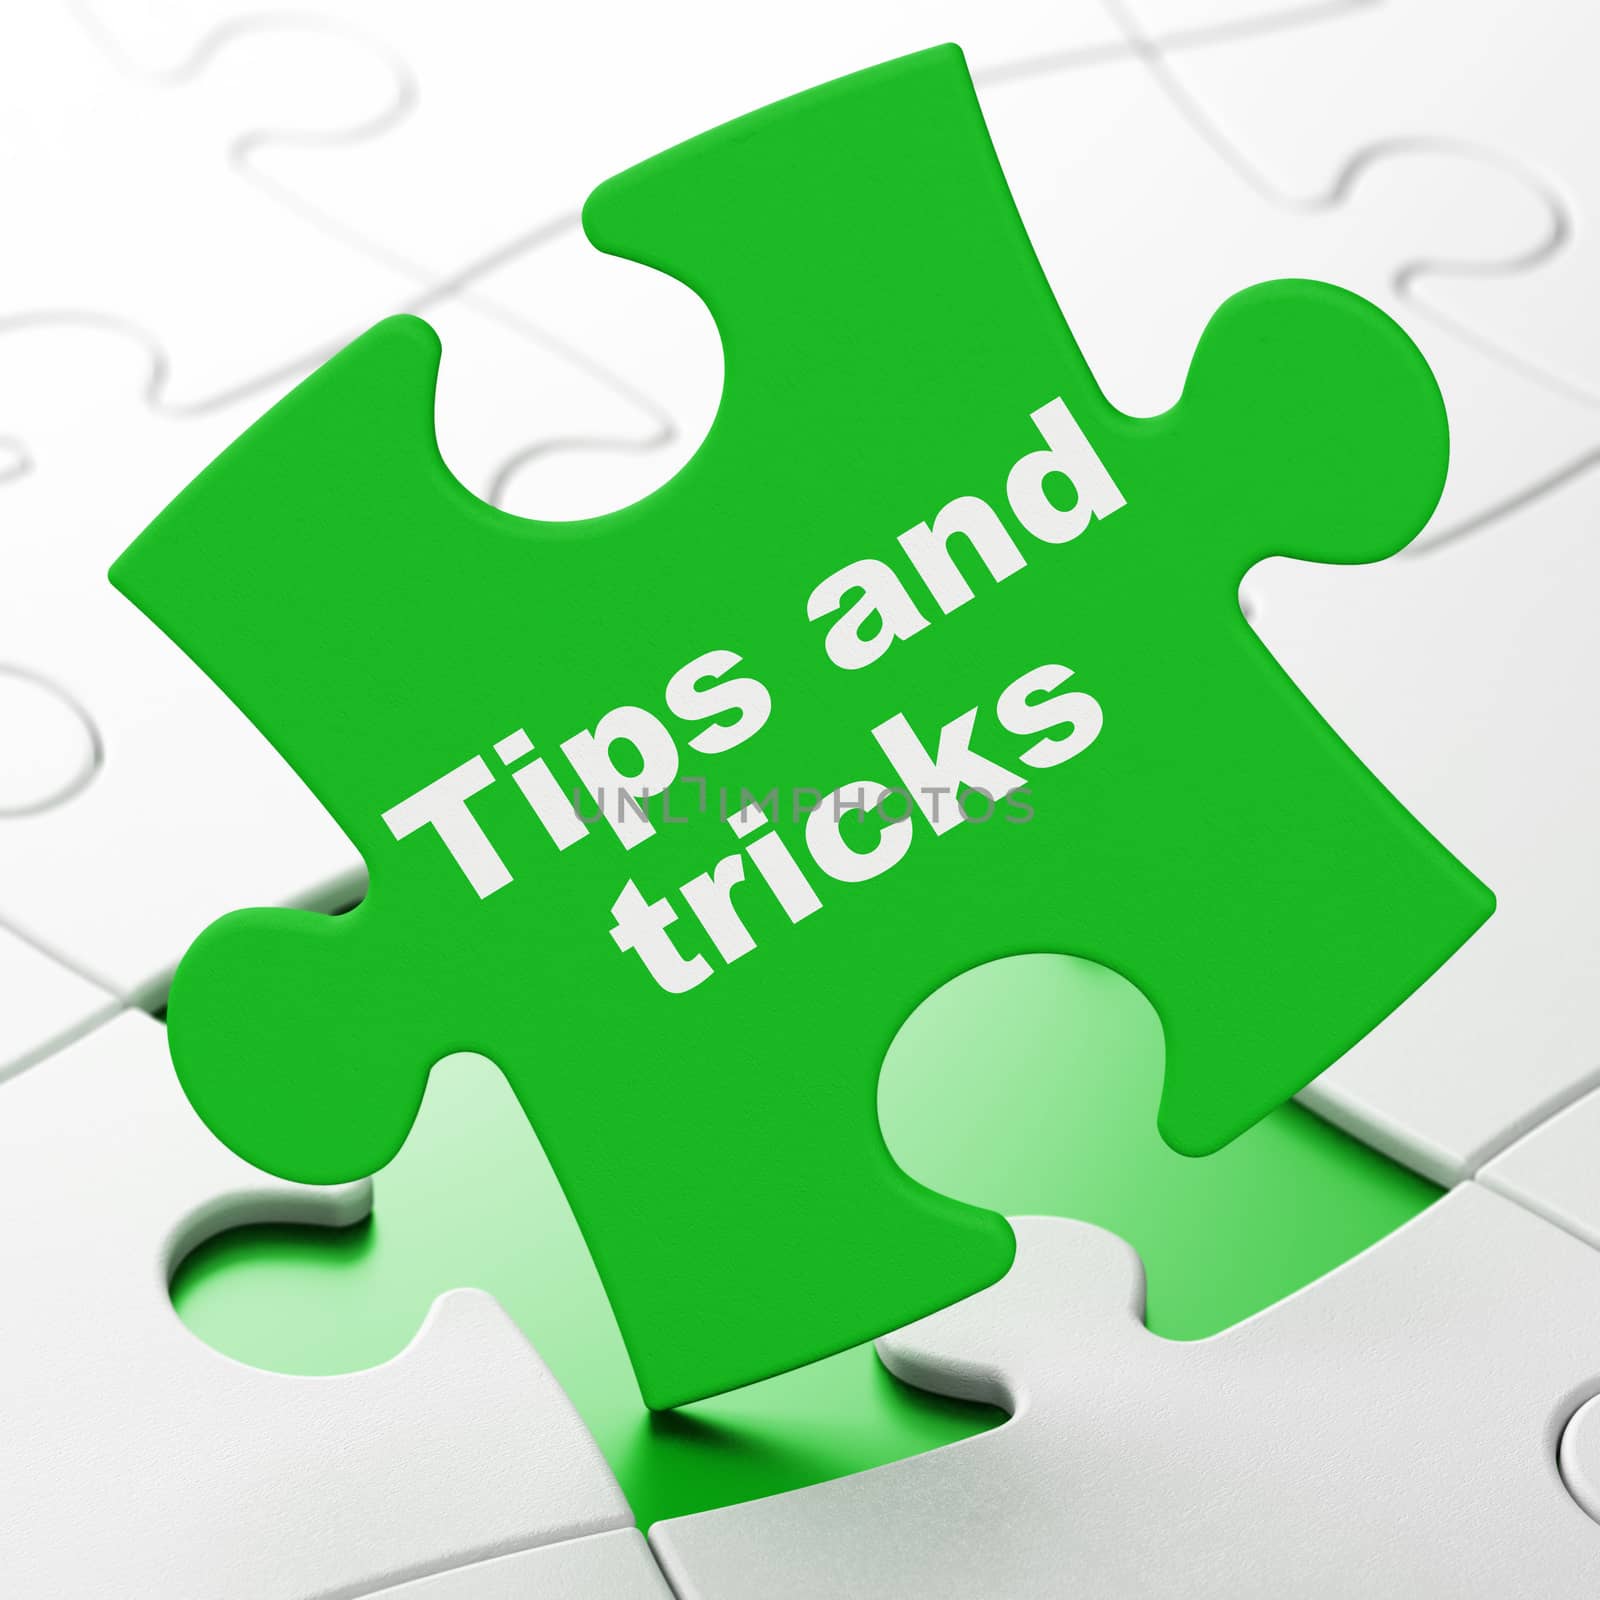 Education concept: Tips And Tricks on Green puzzle pieces background, 3D rendering